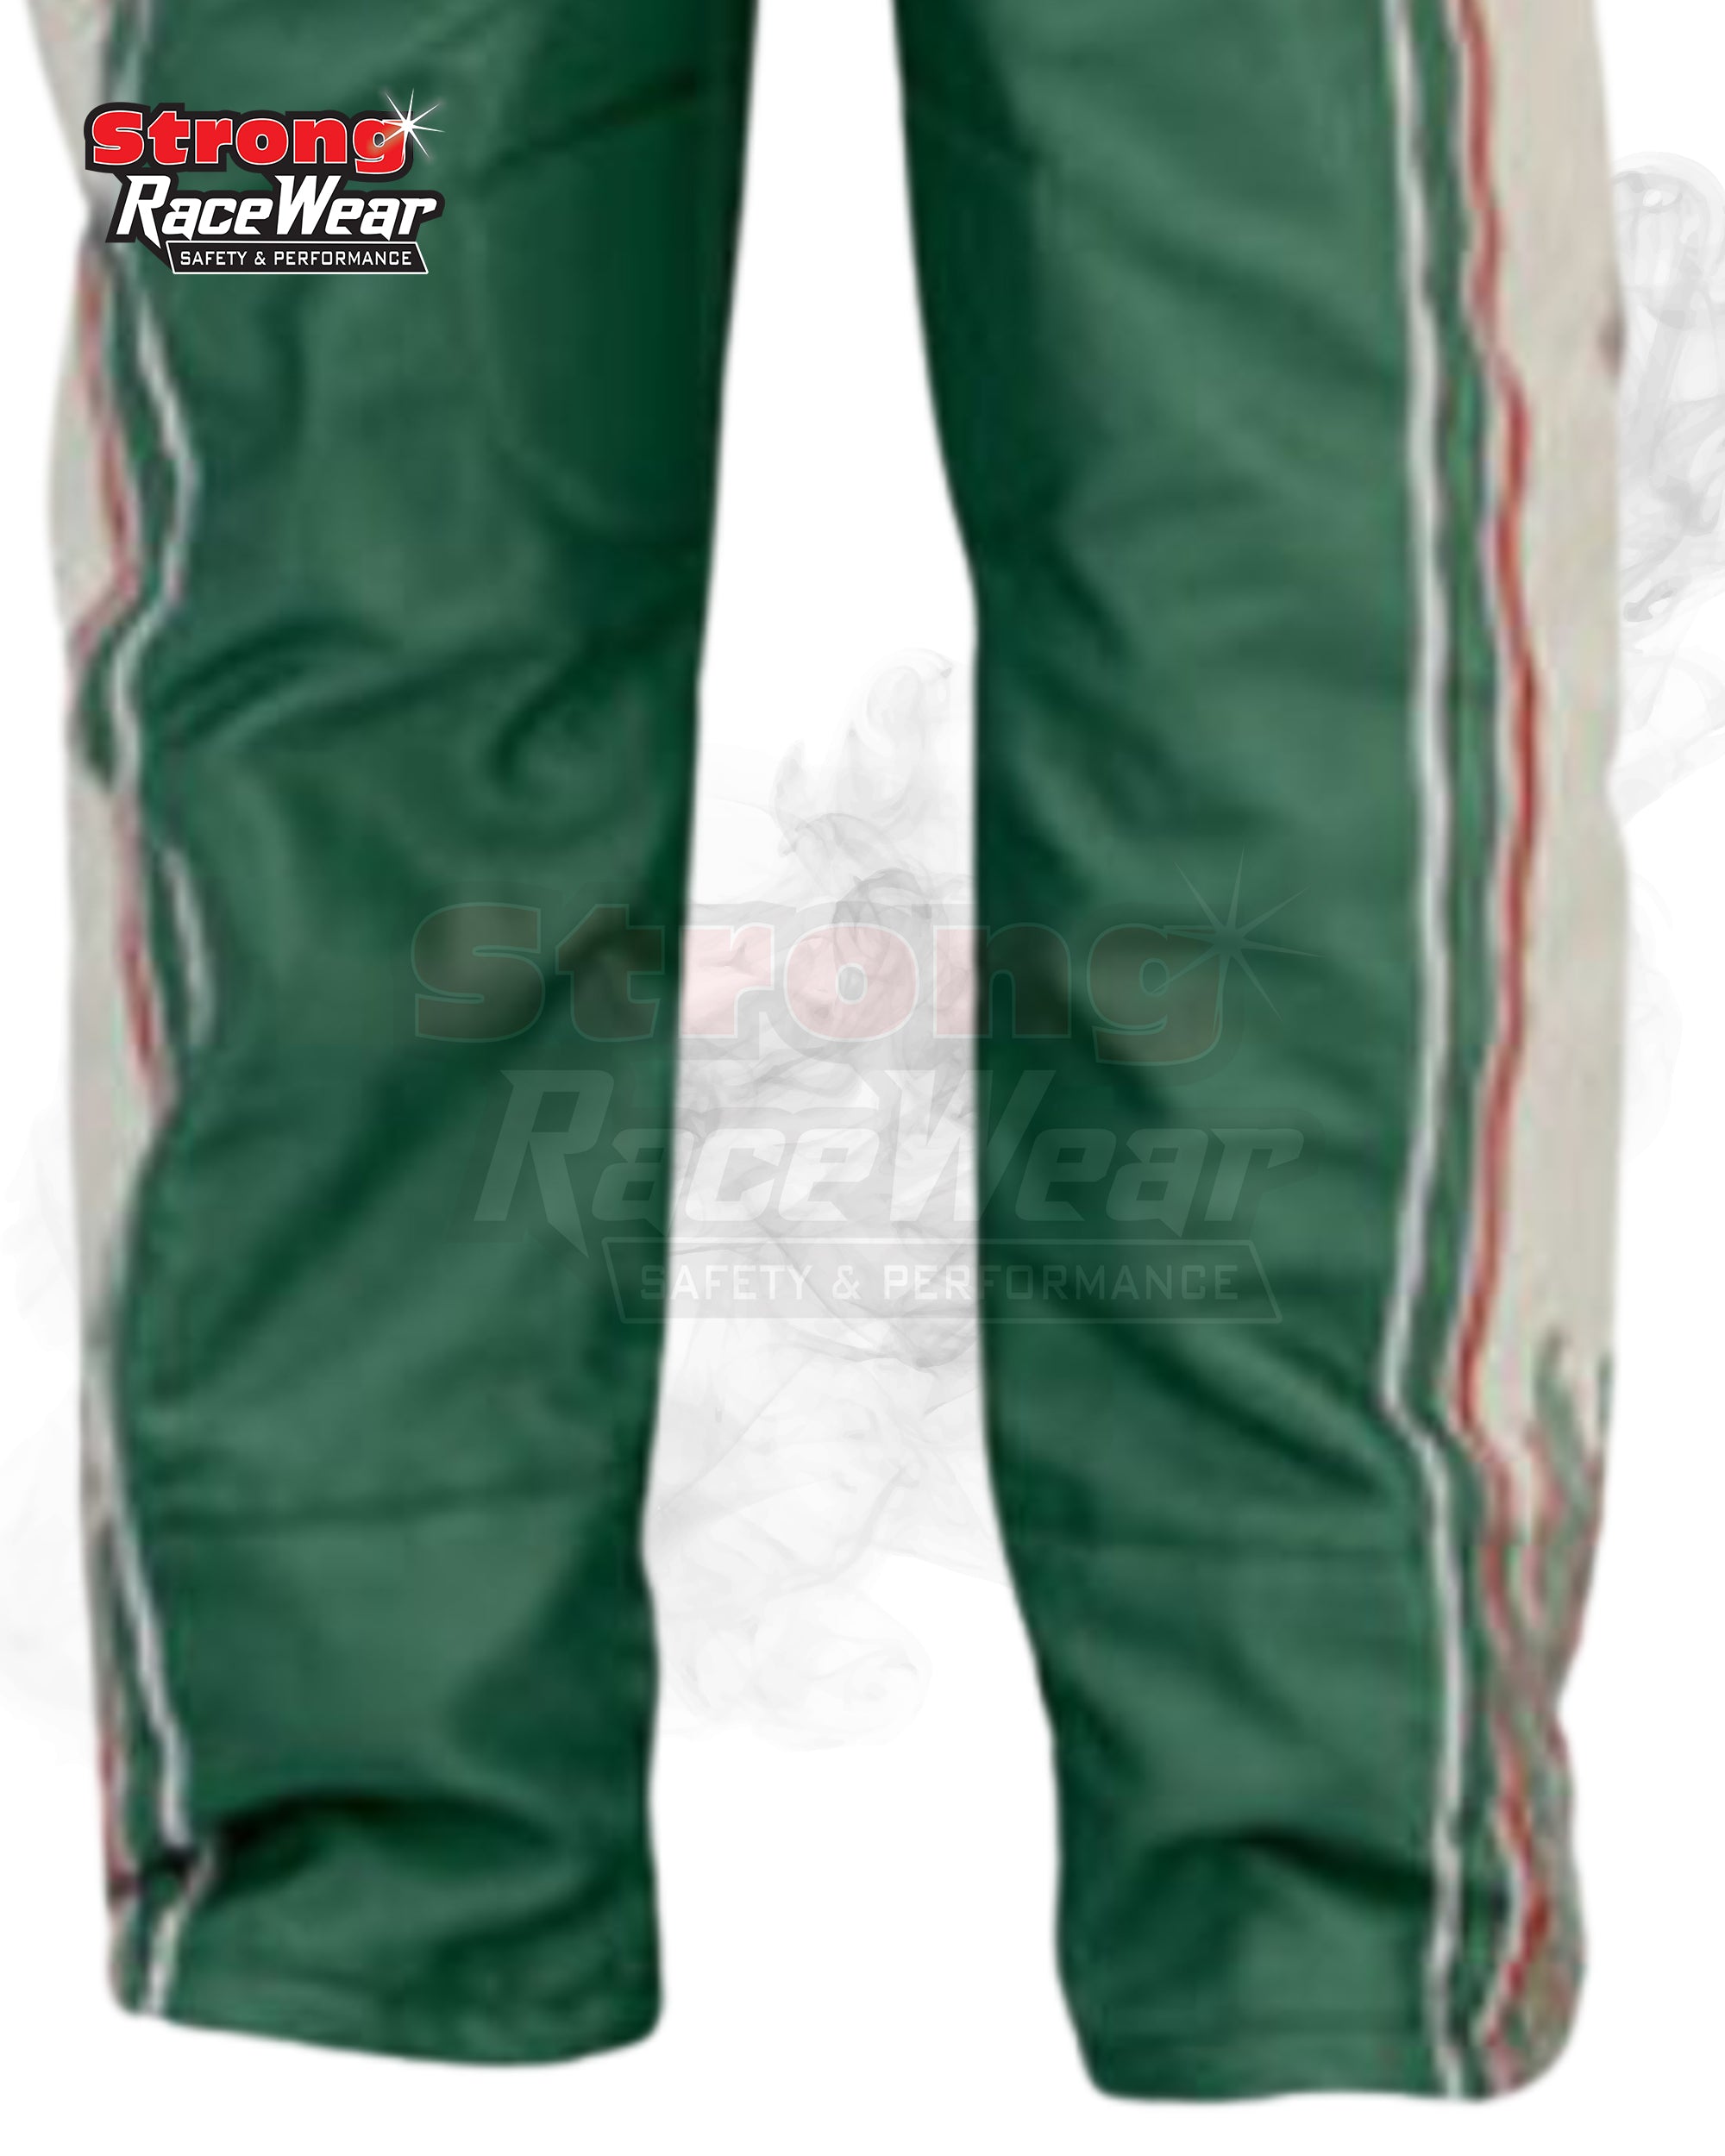 Tonykart Racing Suit by OMP